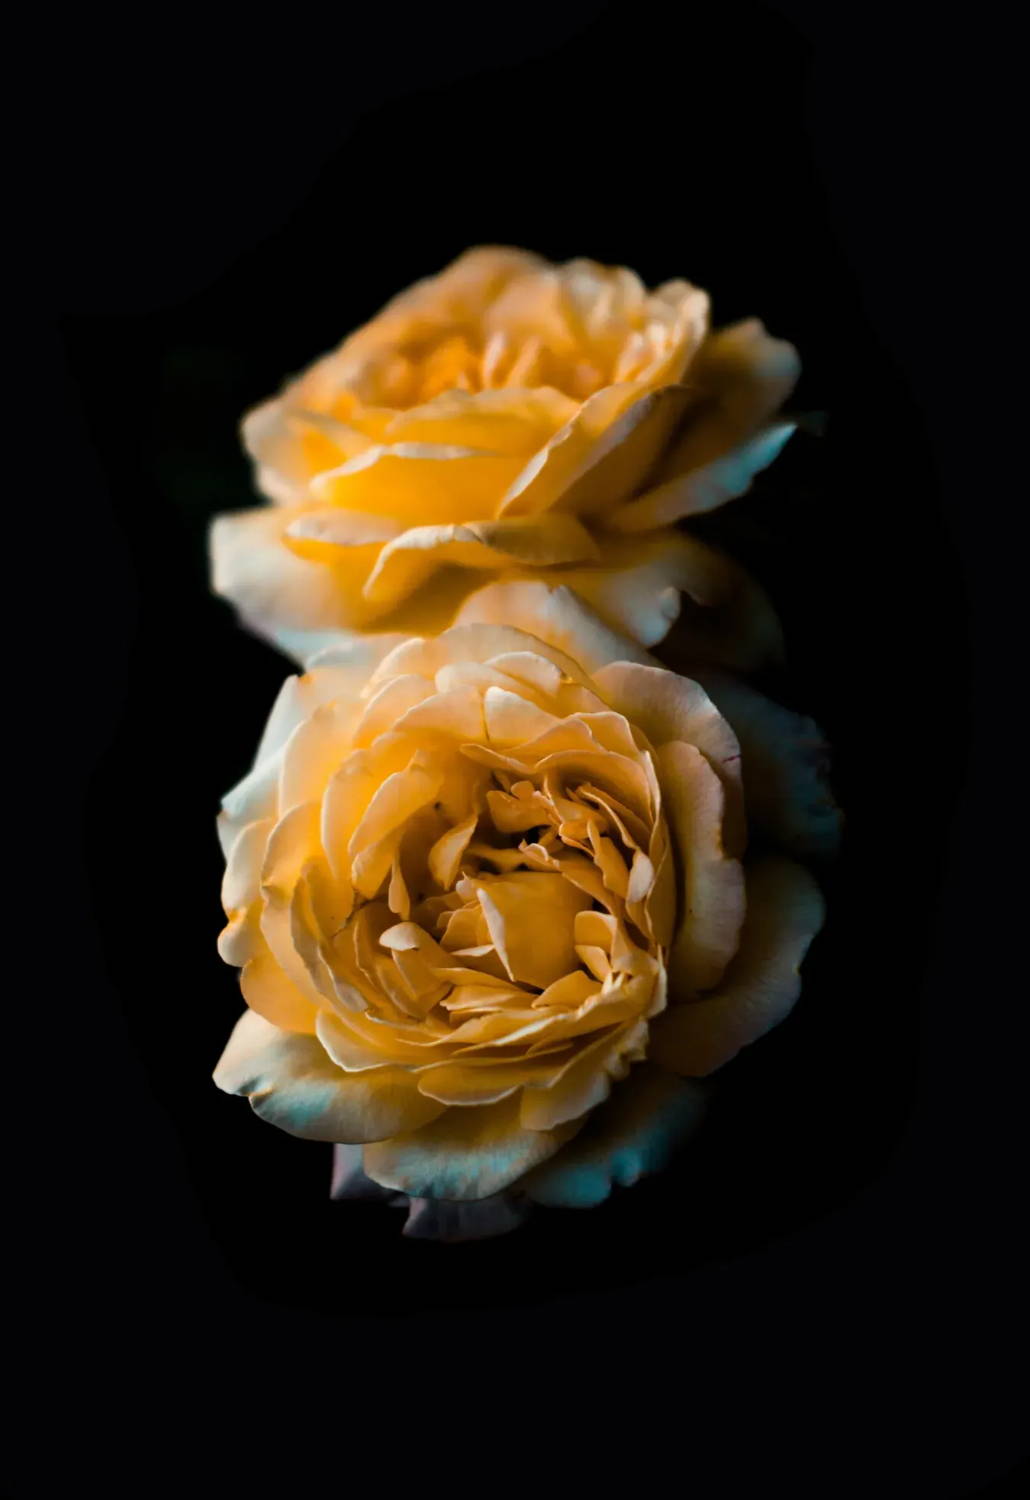 Two yellow roses in front of a black background